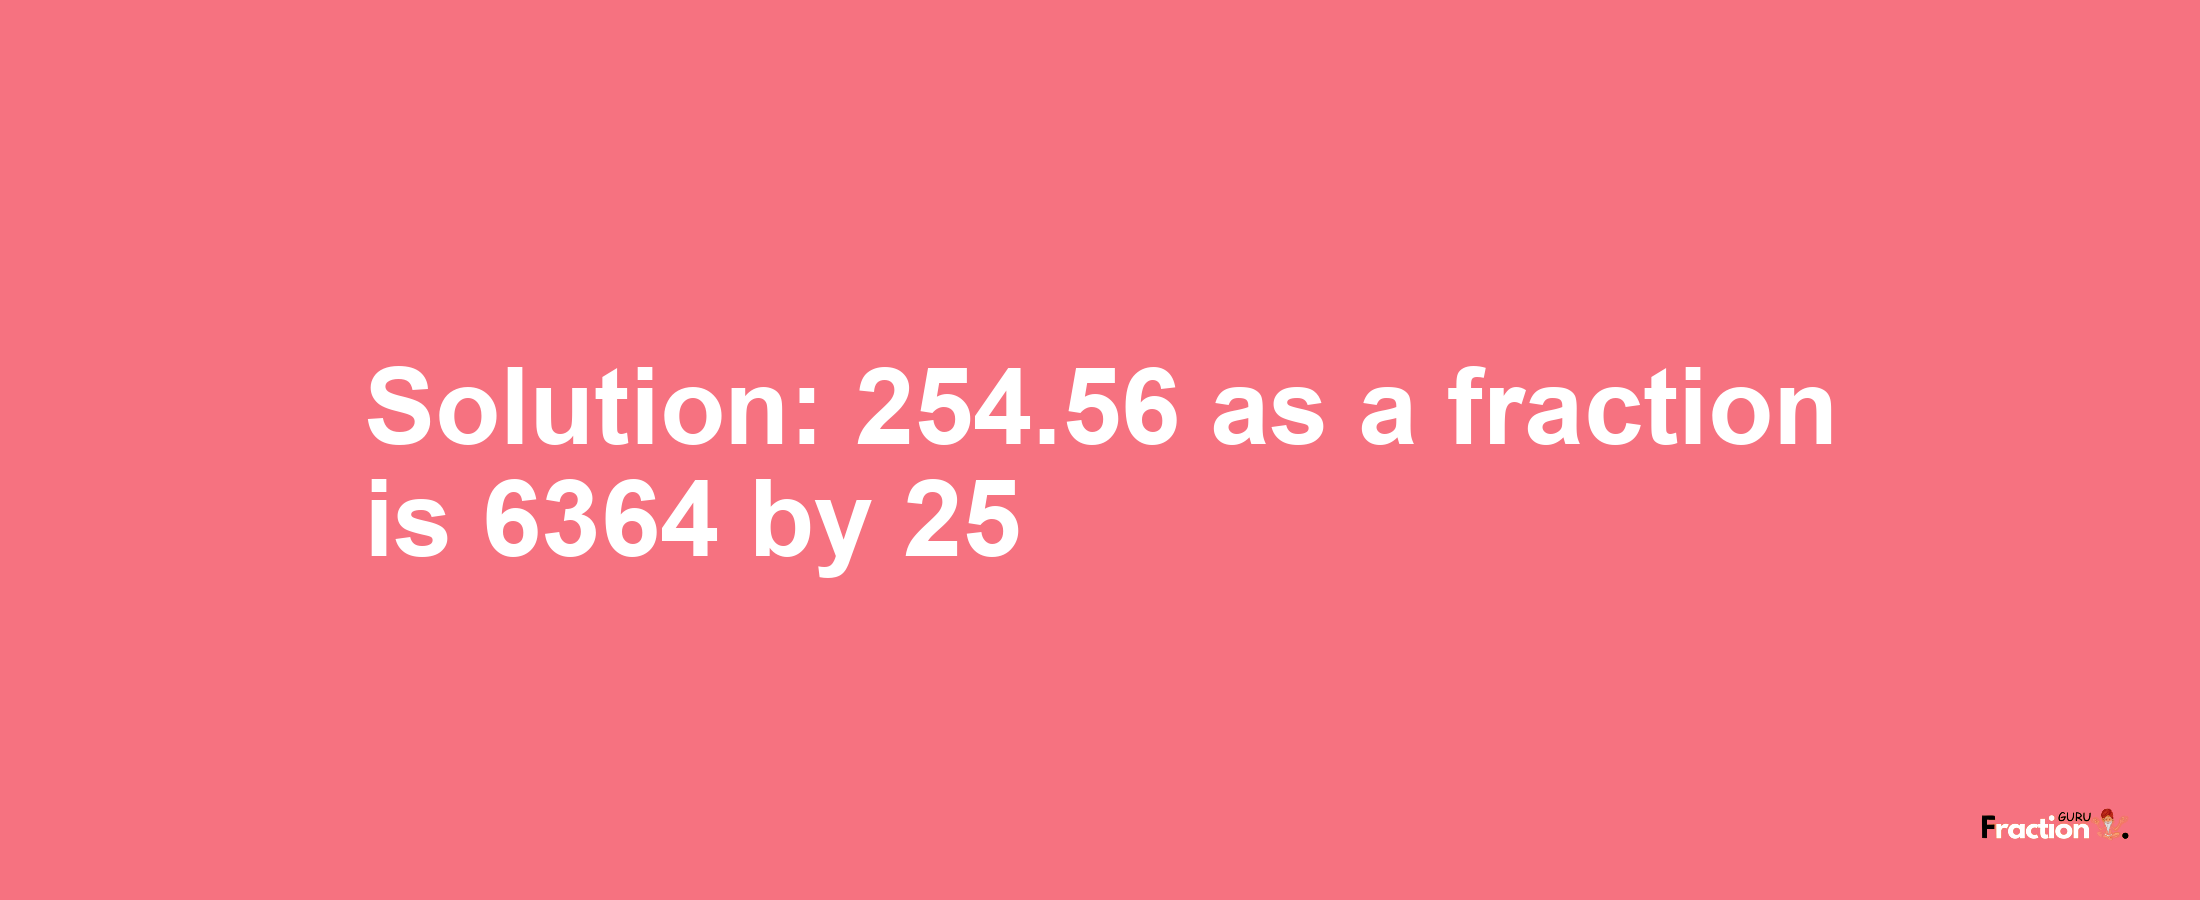 Solution:254.56 as a fraction is 6364/25